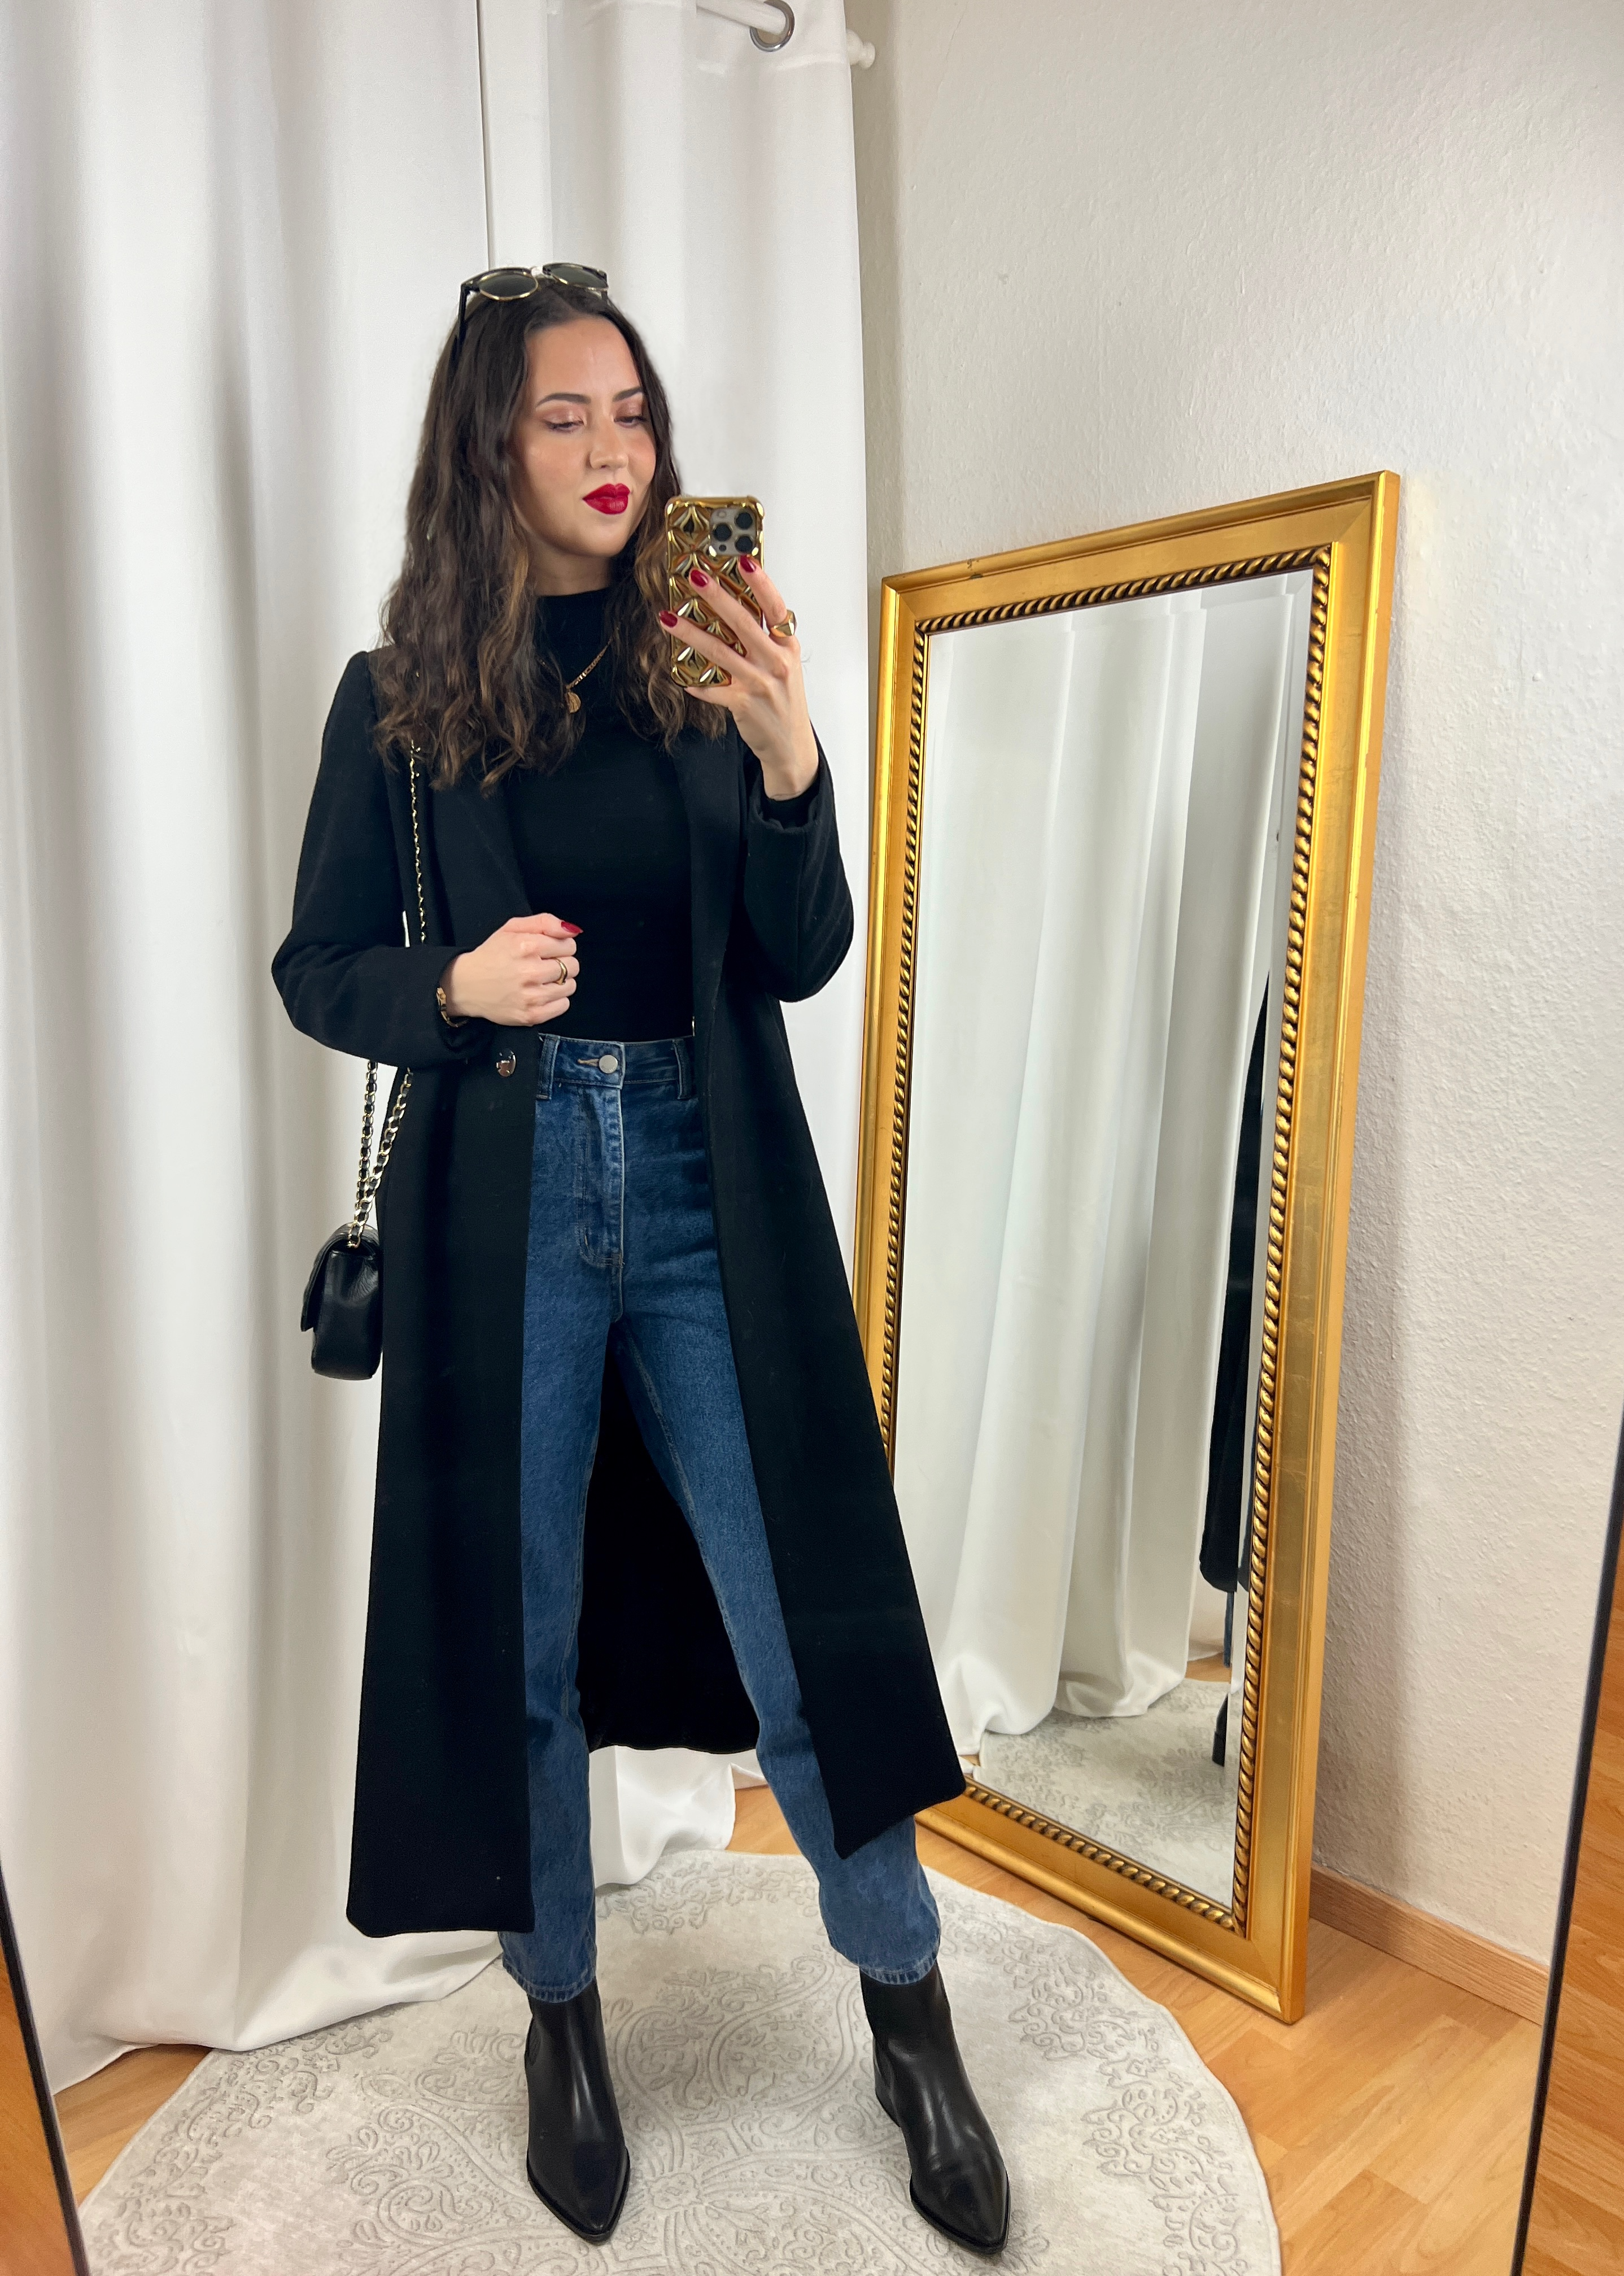 Elegant Black Wool Coat and Mom Jeans Outfit